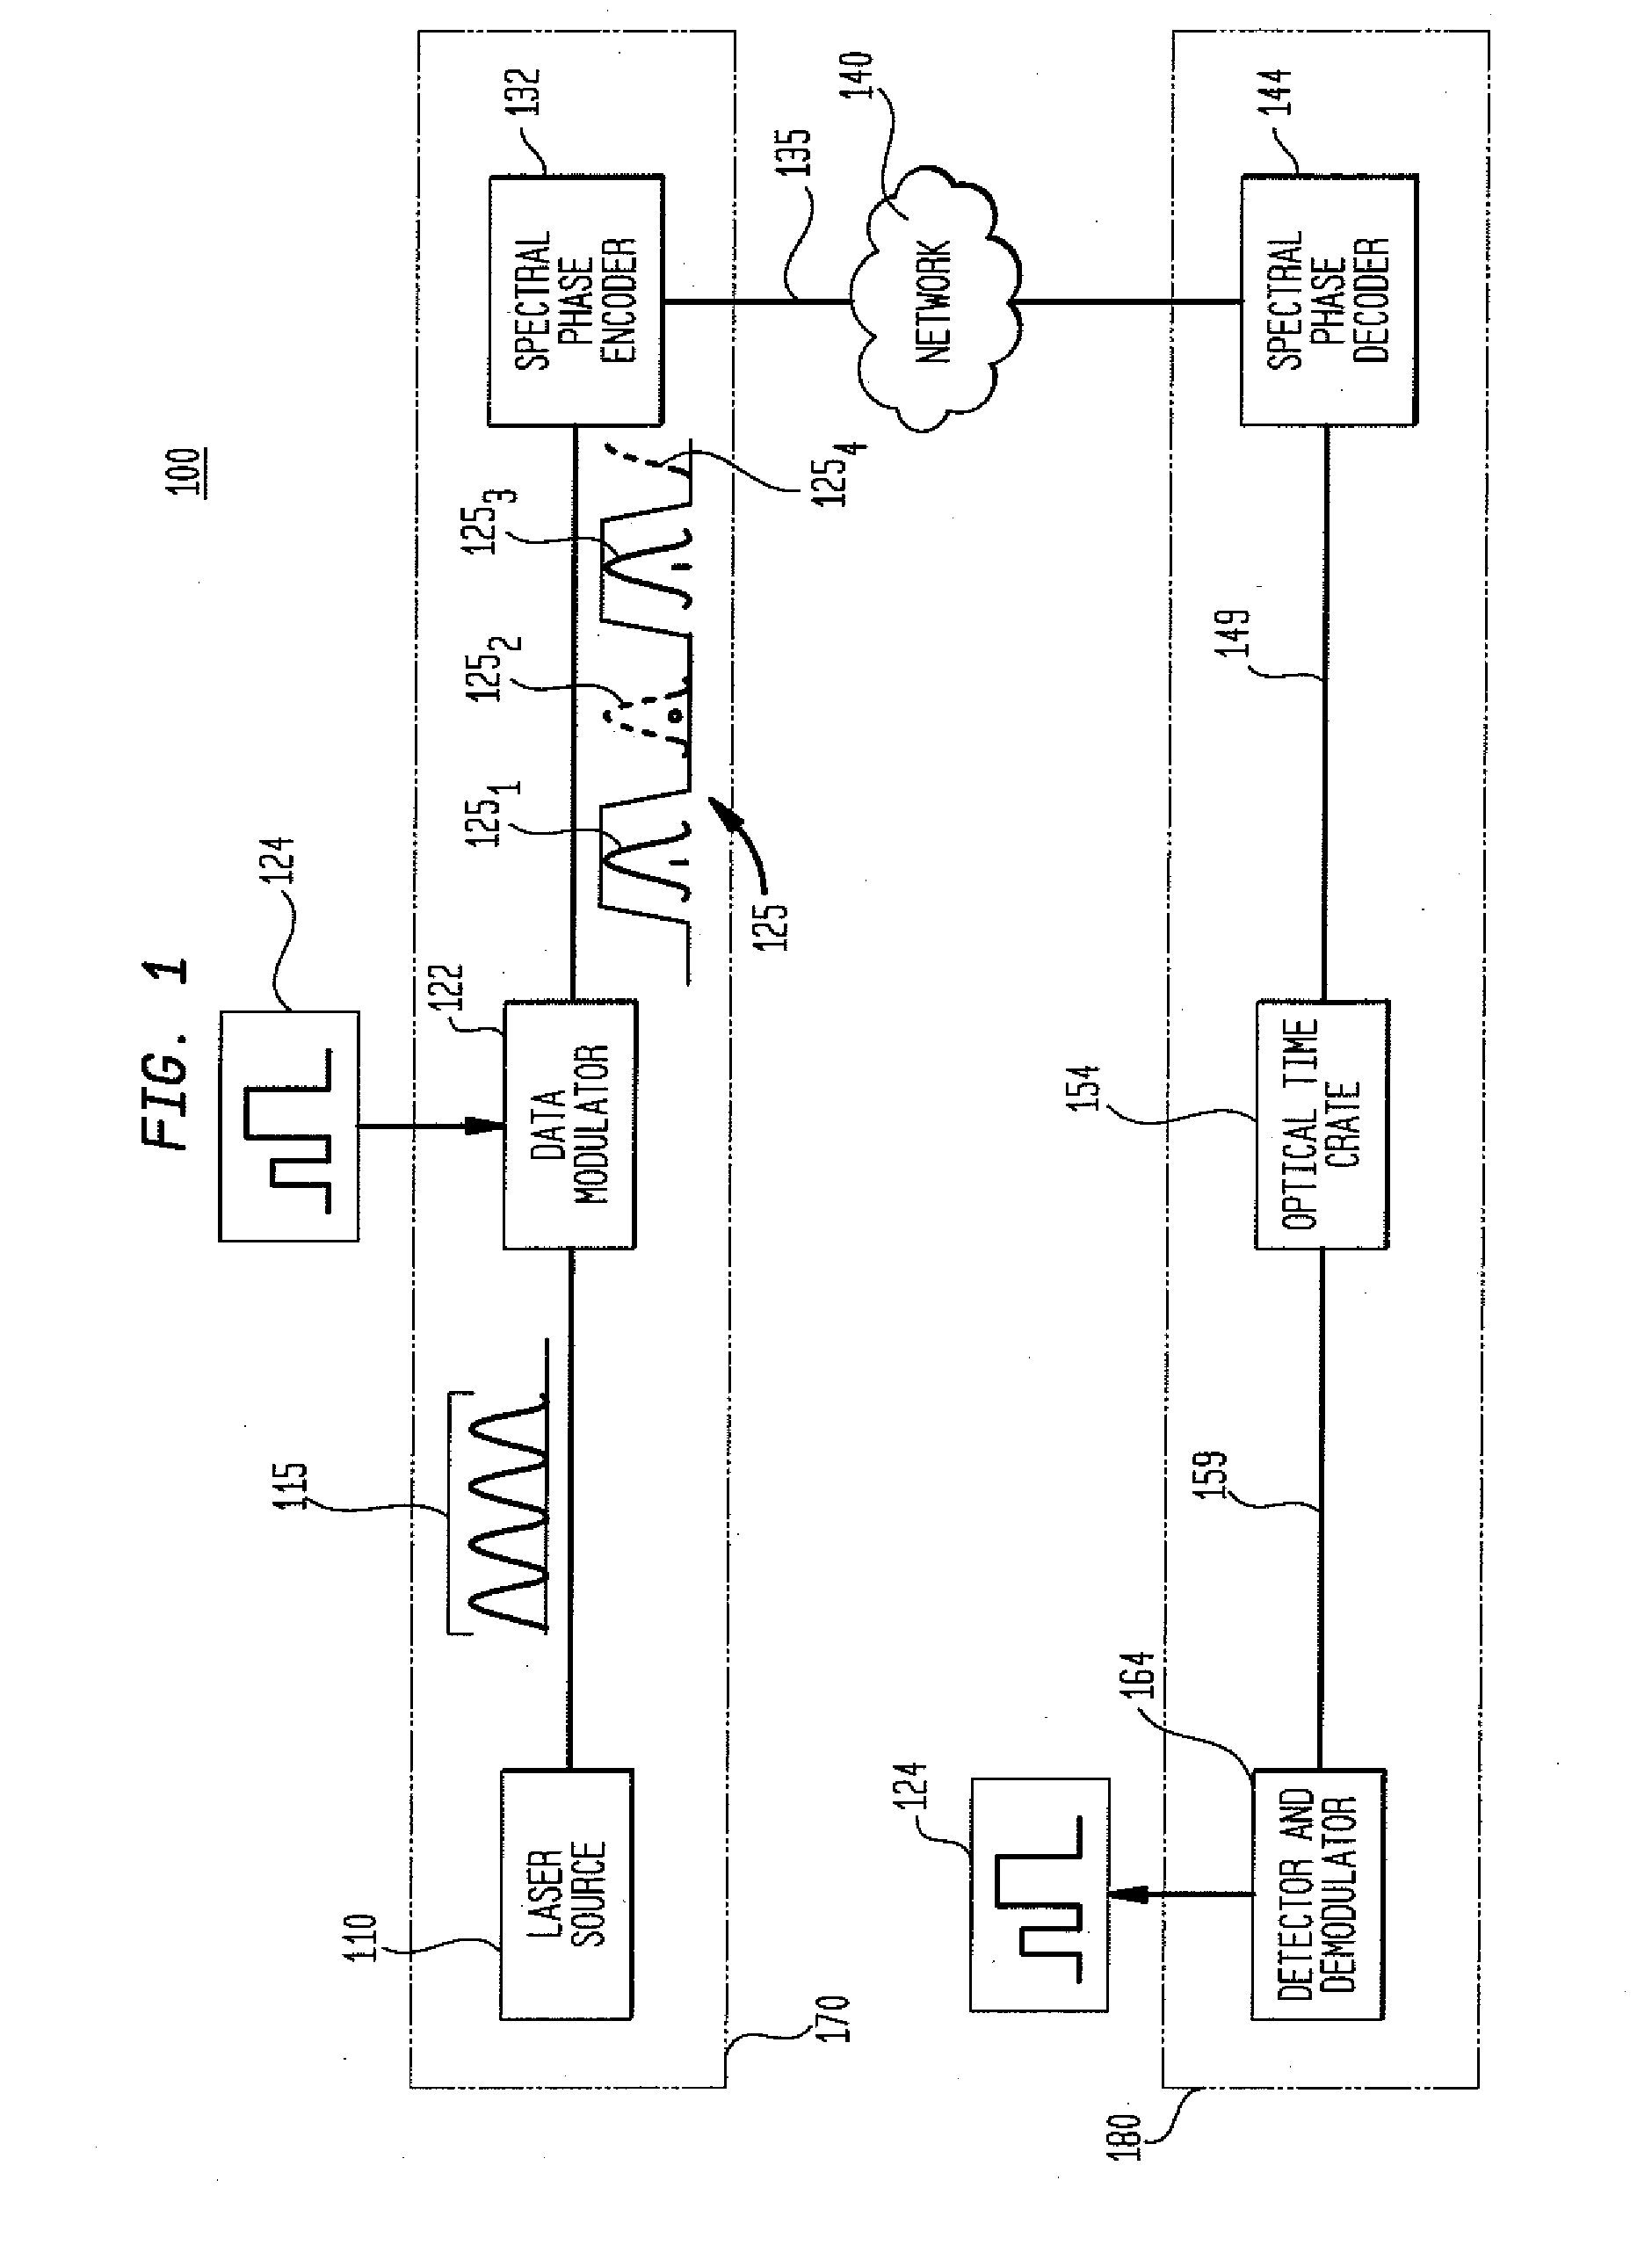 Variable spectral phase encoder/decoder based on decomposition of hadamard codes